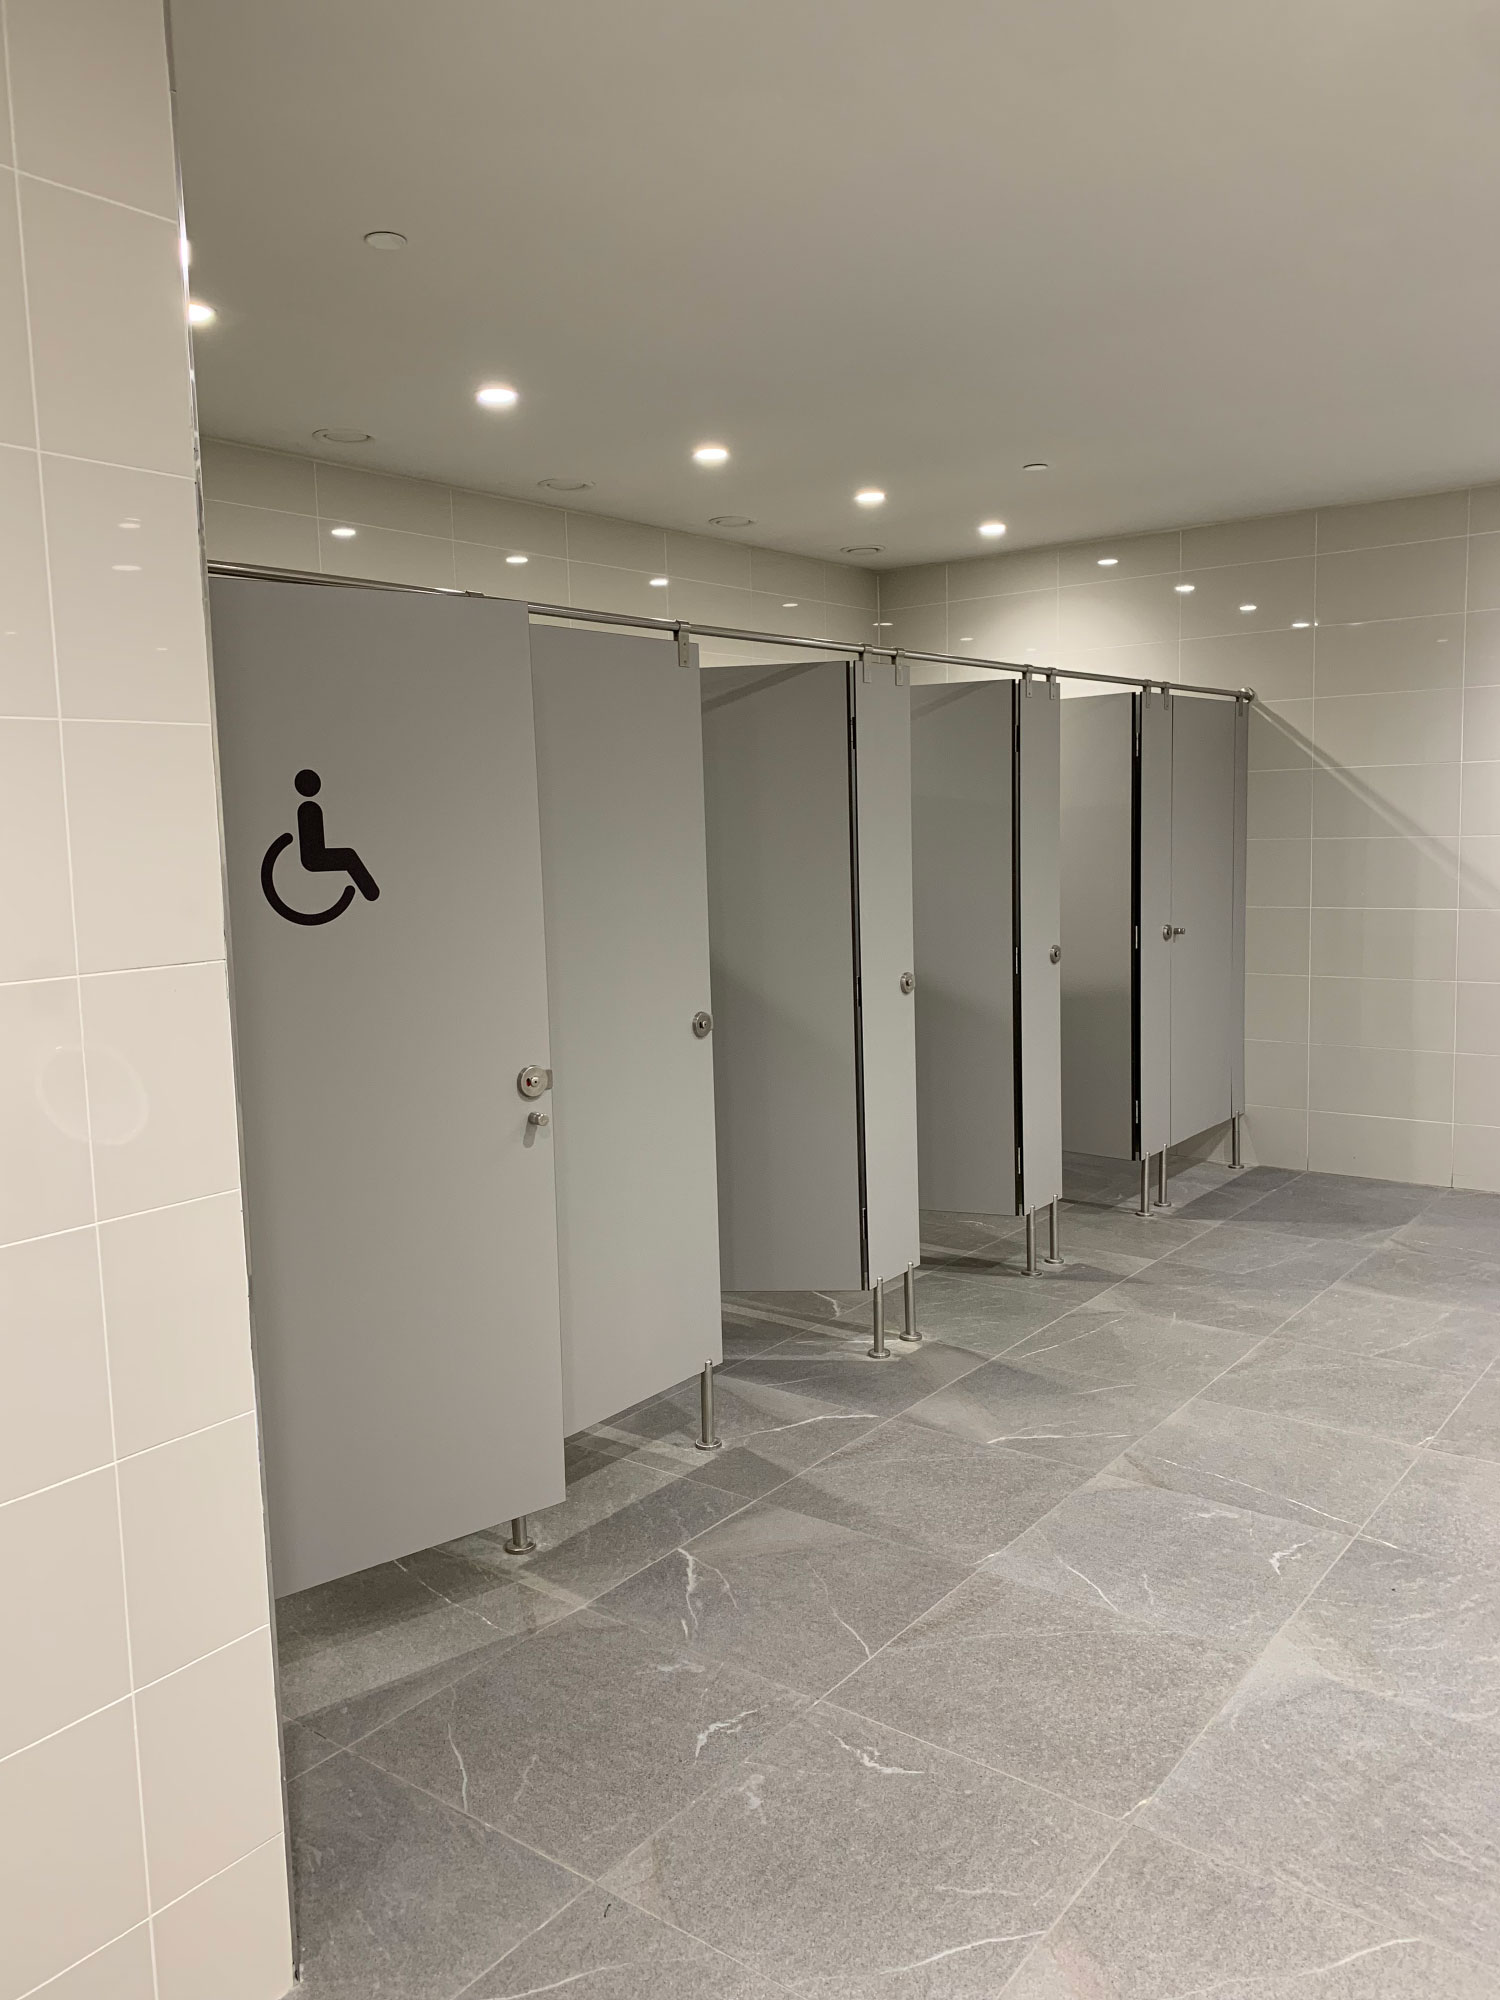 Airport bathroom partitions with Fundermax phenolic panels